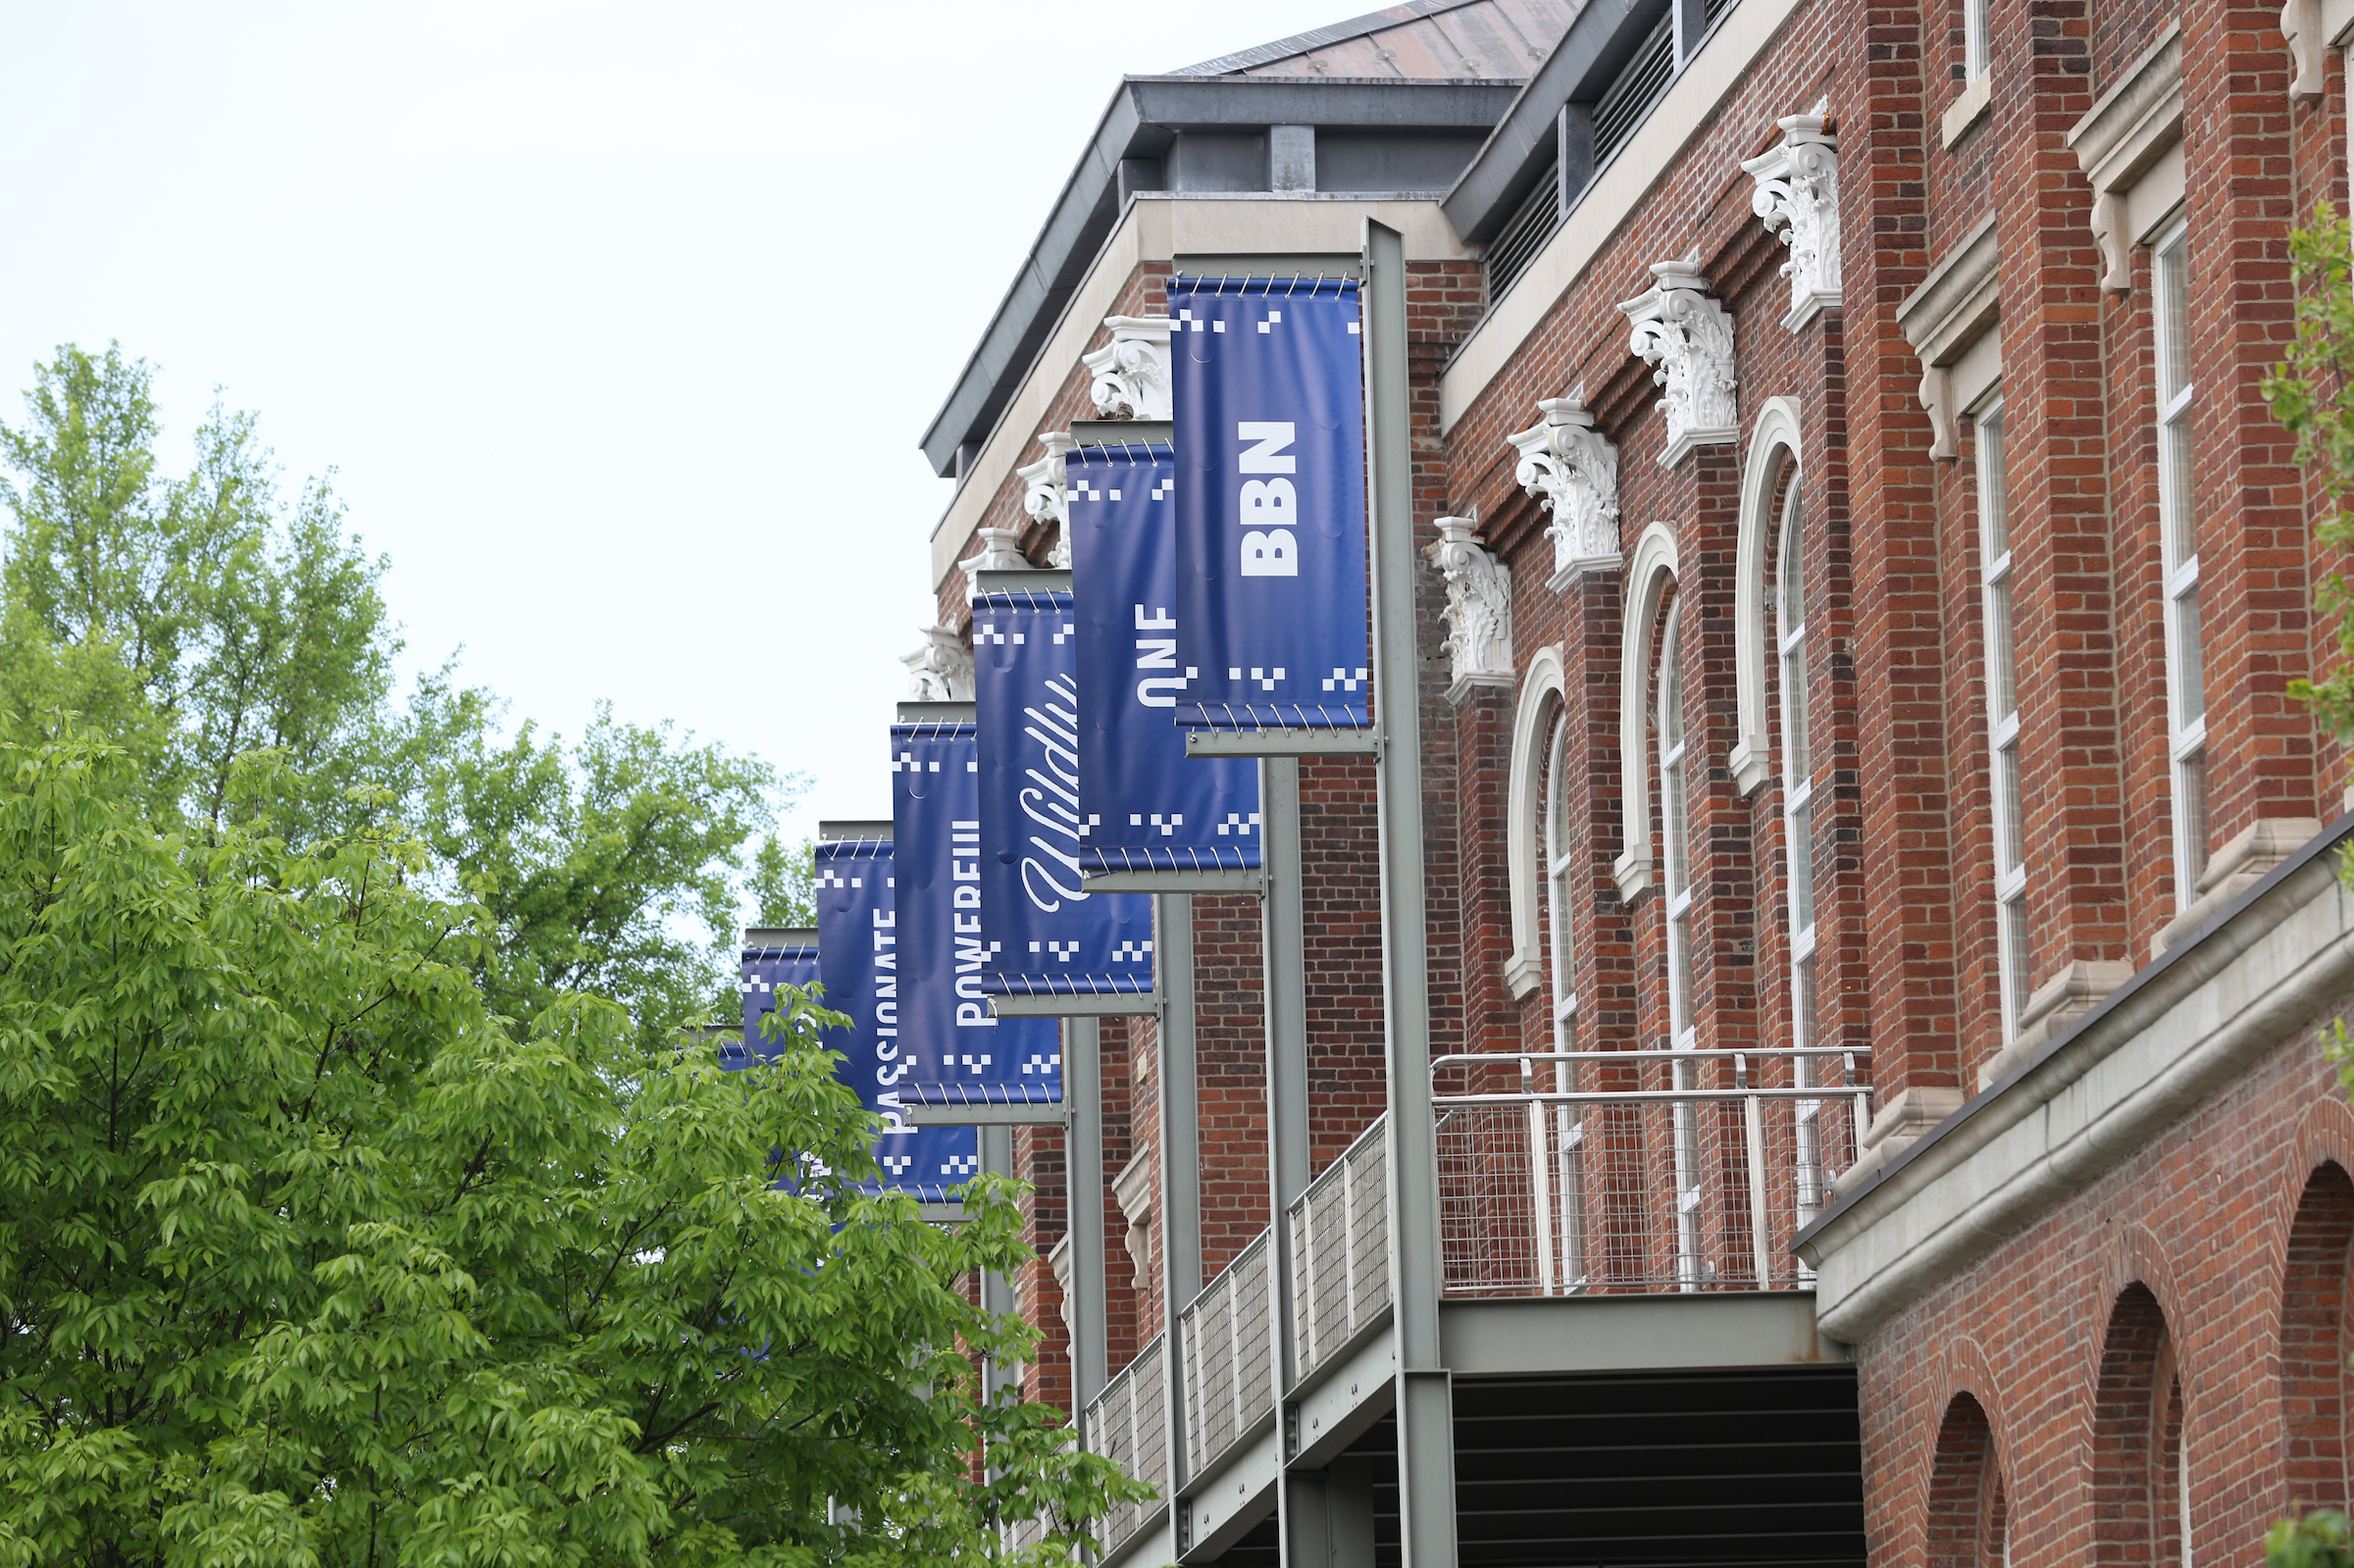 Photo of blue Wildly Possible banners on the back of Main Building